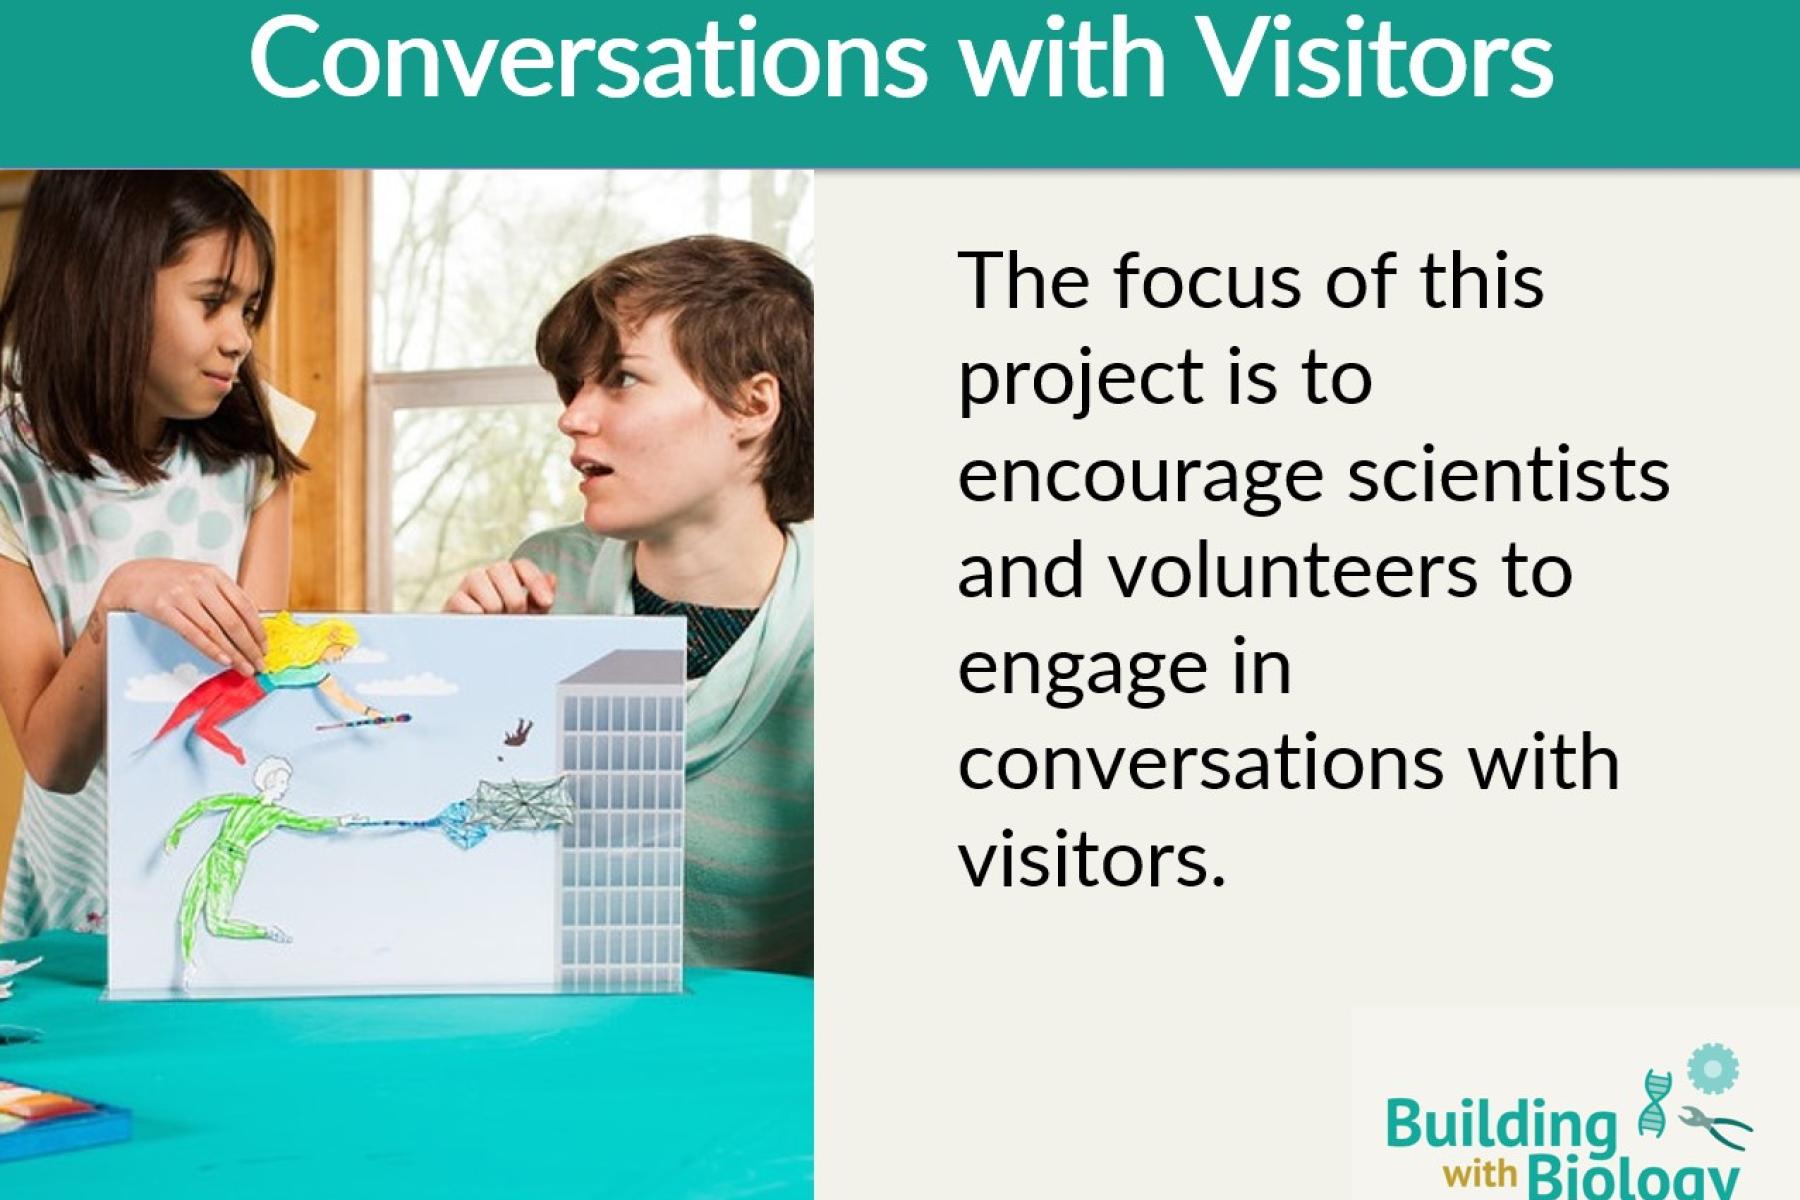 Powerpoint slide discussing Conversation with Visitors tips